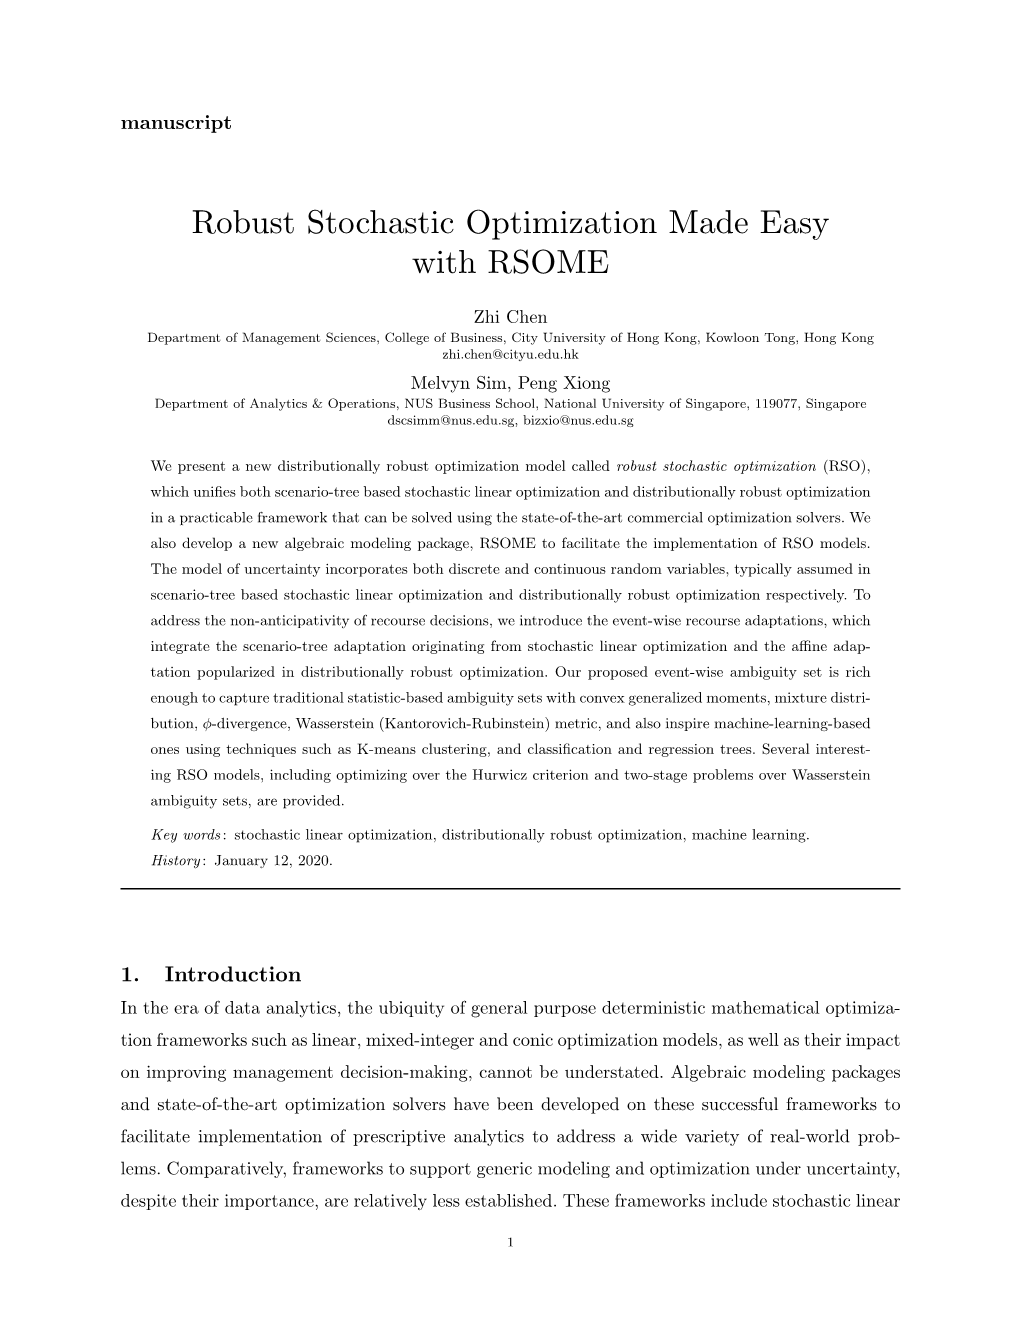 Robust Stochastic Optimization Made Easy with RSOME